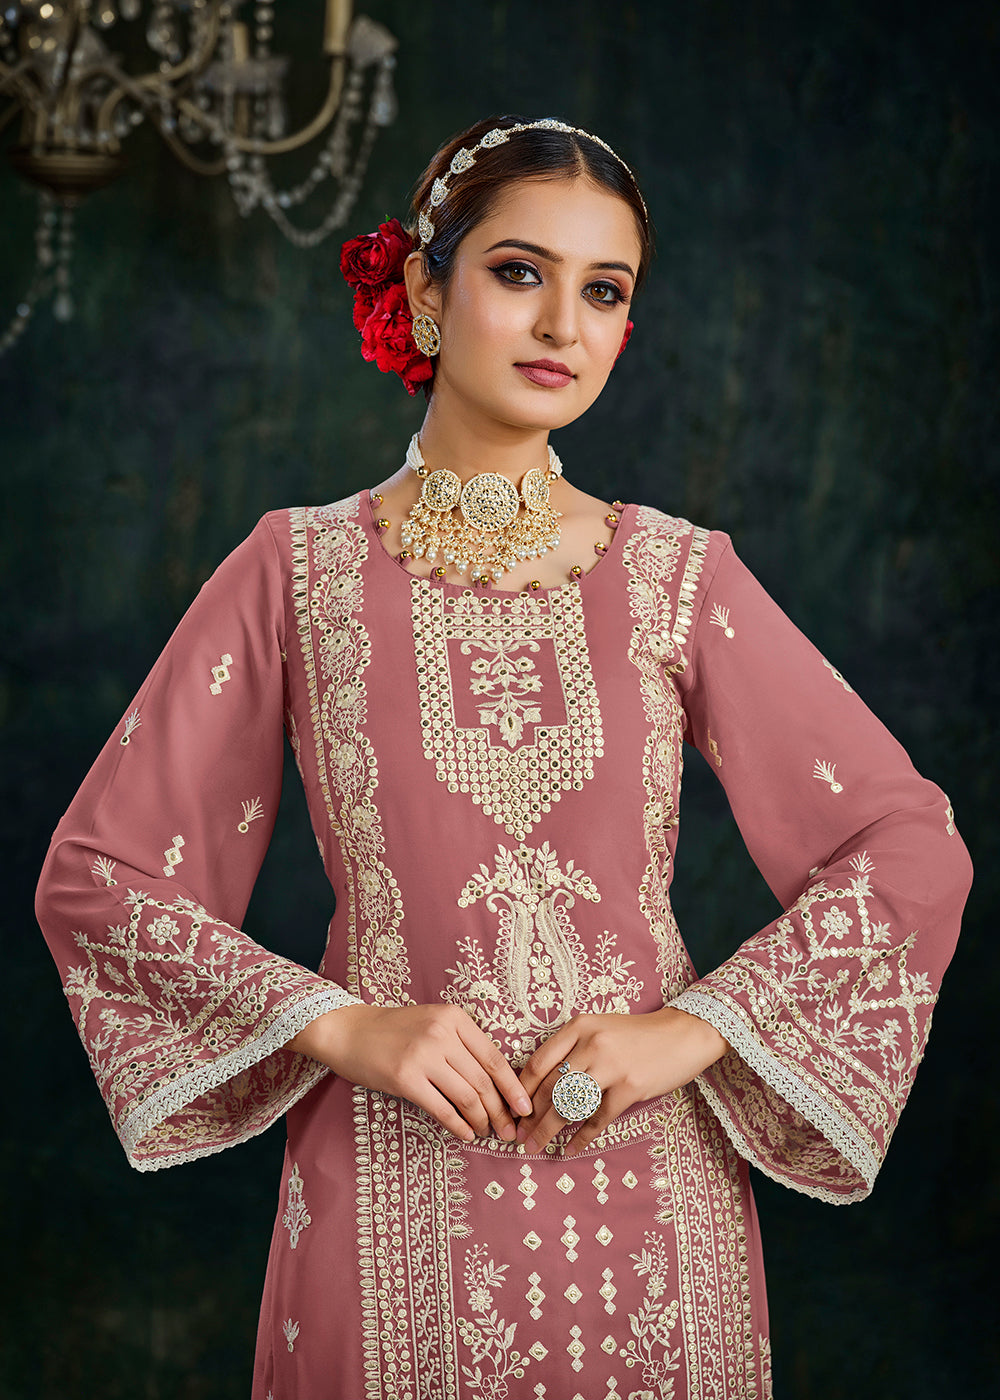 Buy Now Ethereal Pink Foil Mirror Embroidered Palazzo Salwar Suit Online in USA, UK, Canada, Germany, Australia & Worldwide at Empress Clothing.